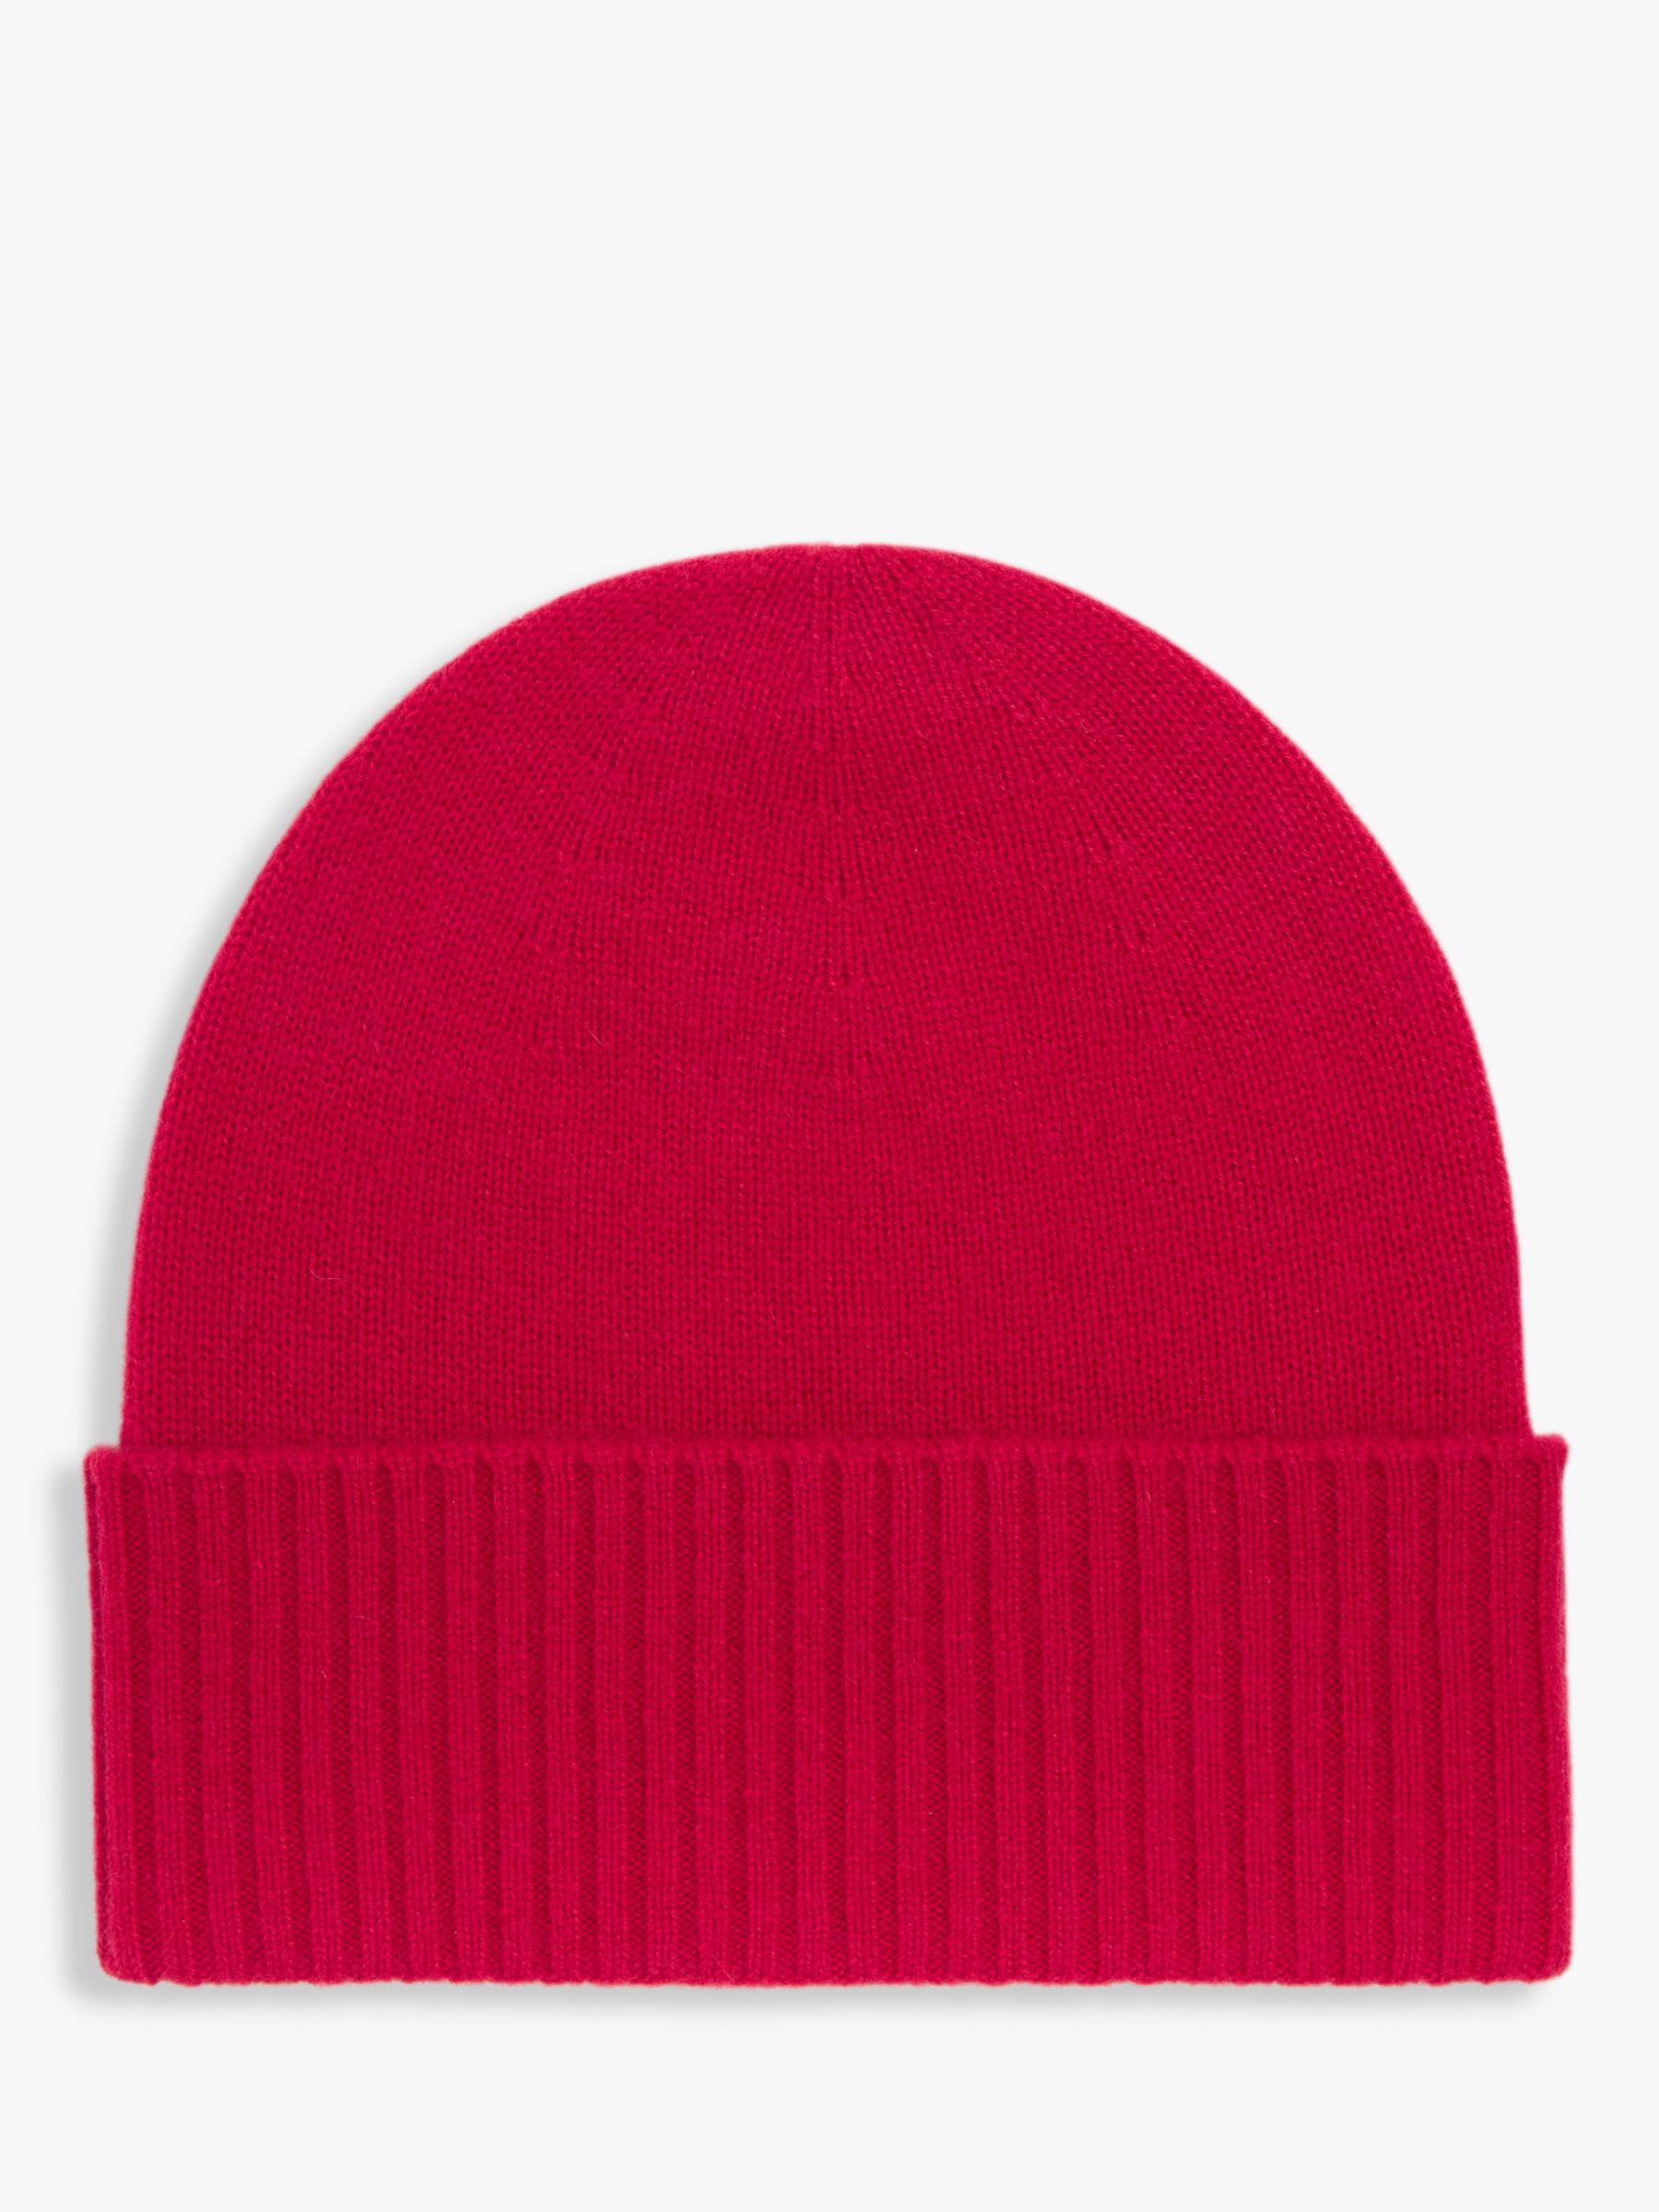 John Lewis Cashmere Beanie Hat, Red at John Lewis & Partners